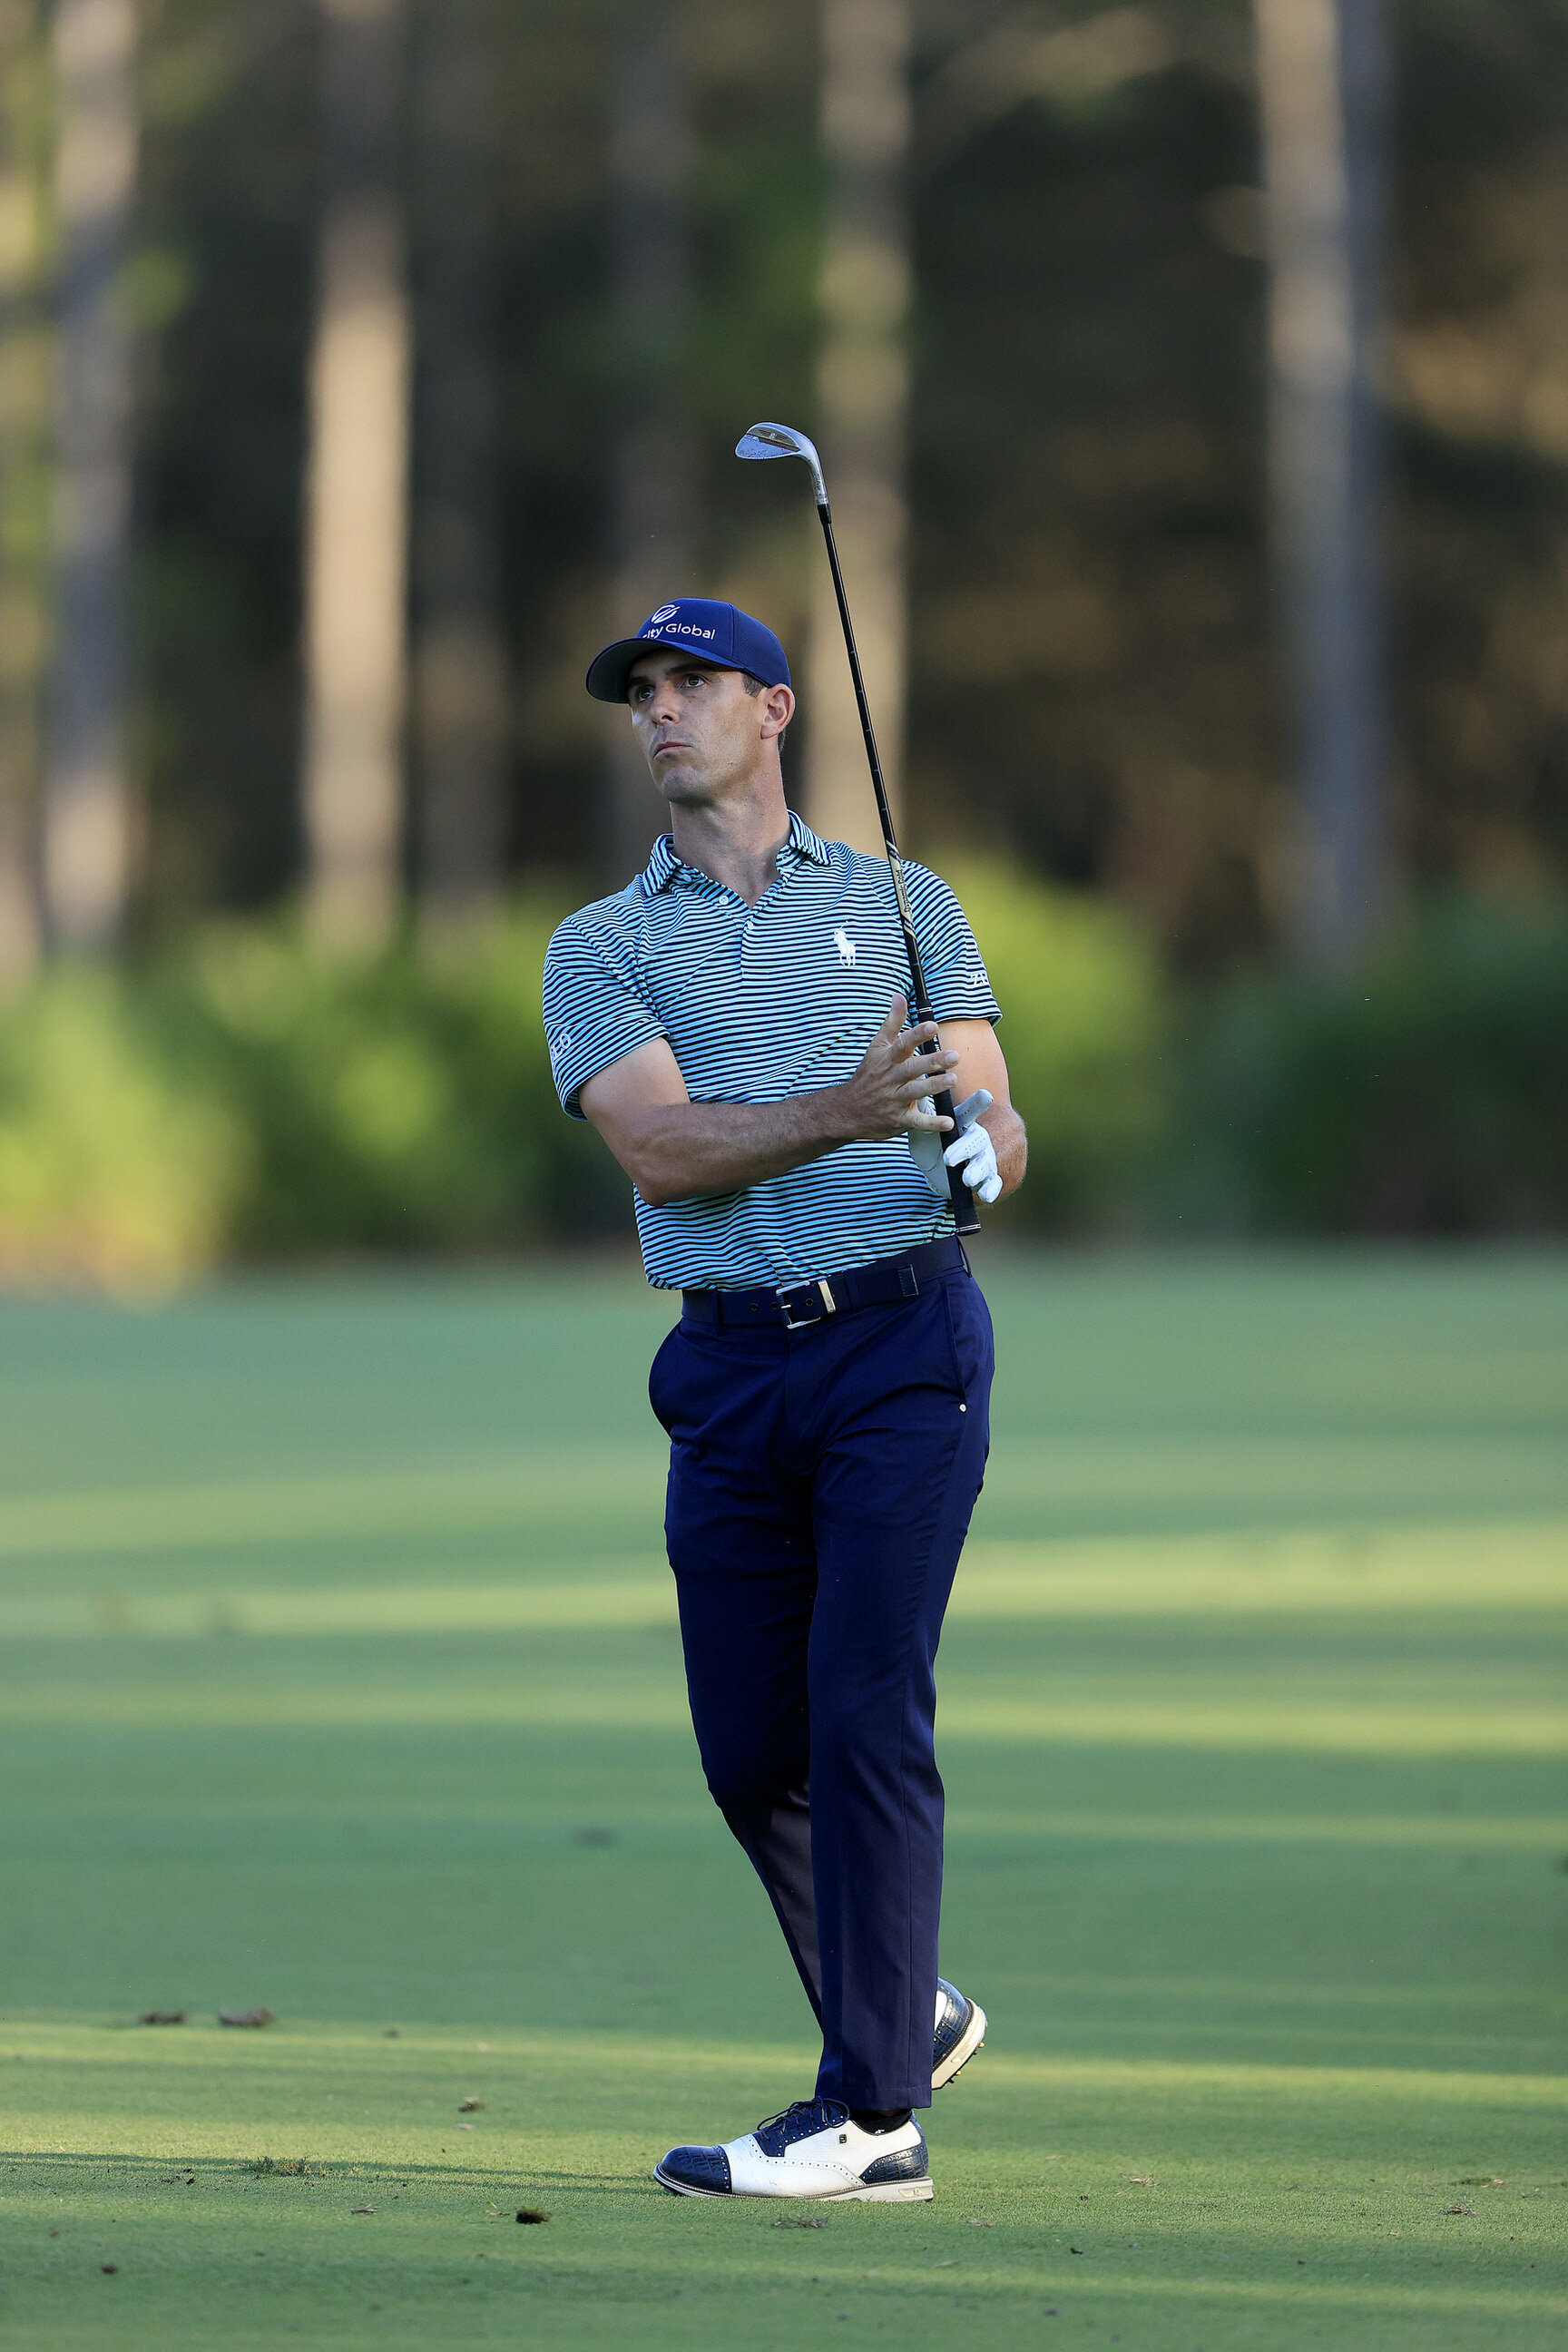  BRADENTON, FLORIDA - FEBRUARY 25: Billy Horschel of the United States plays a shot on the eighth hole during the first round of World Golf Championships-Workday Championship at The Concession on February 25, 2021 in Bradenton, Florida. (Photo by Sam